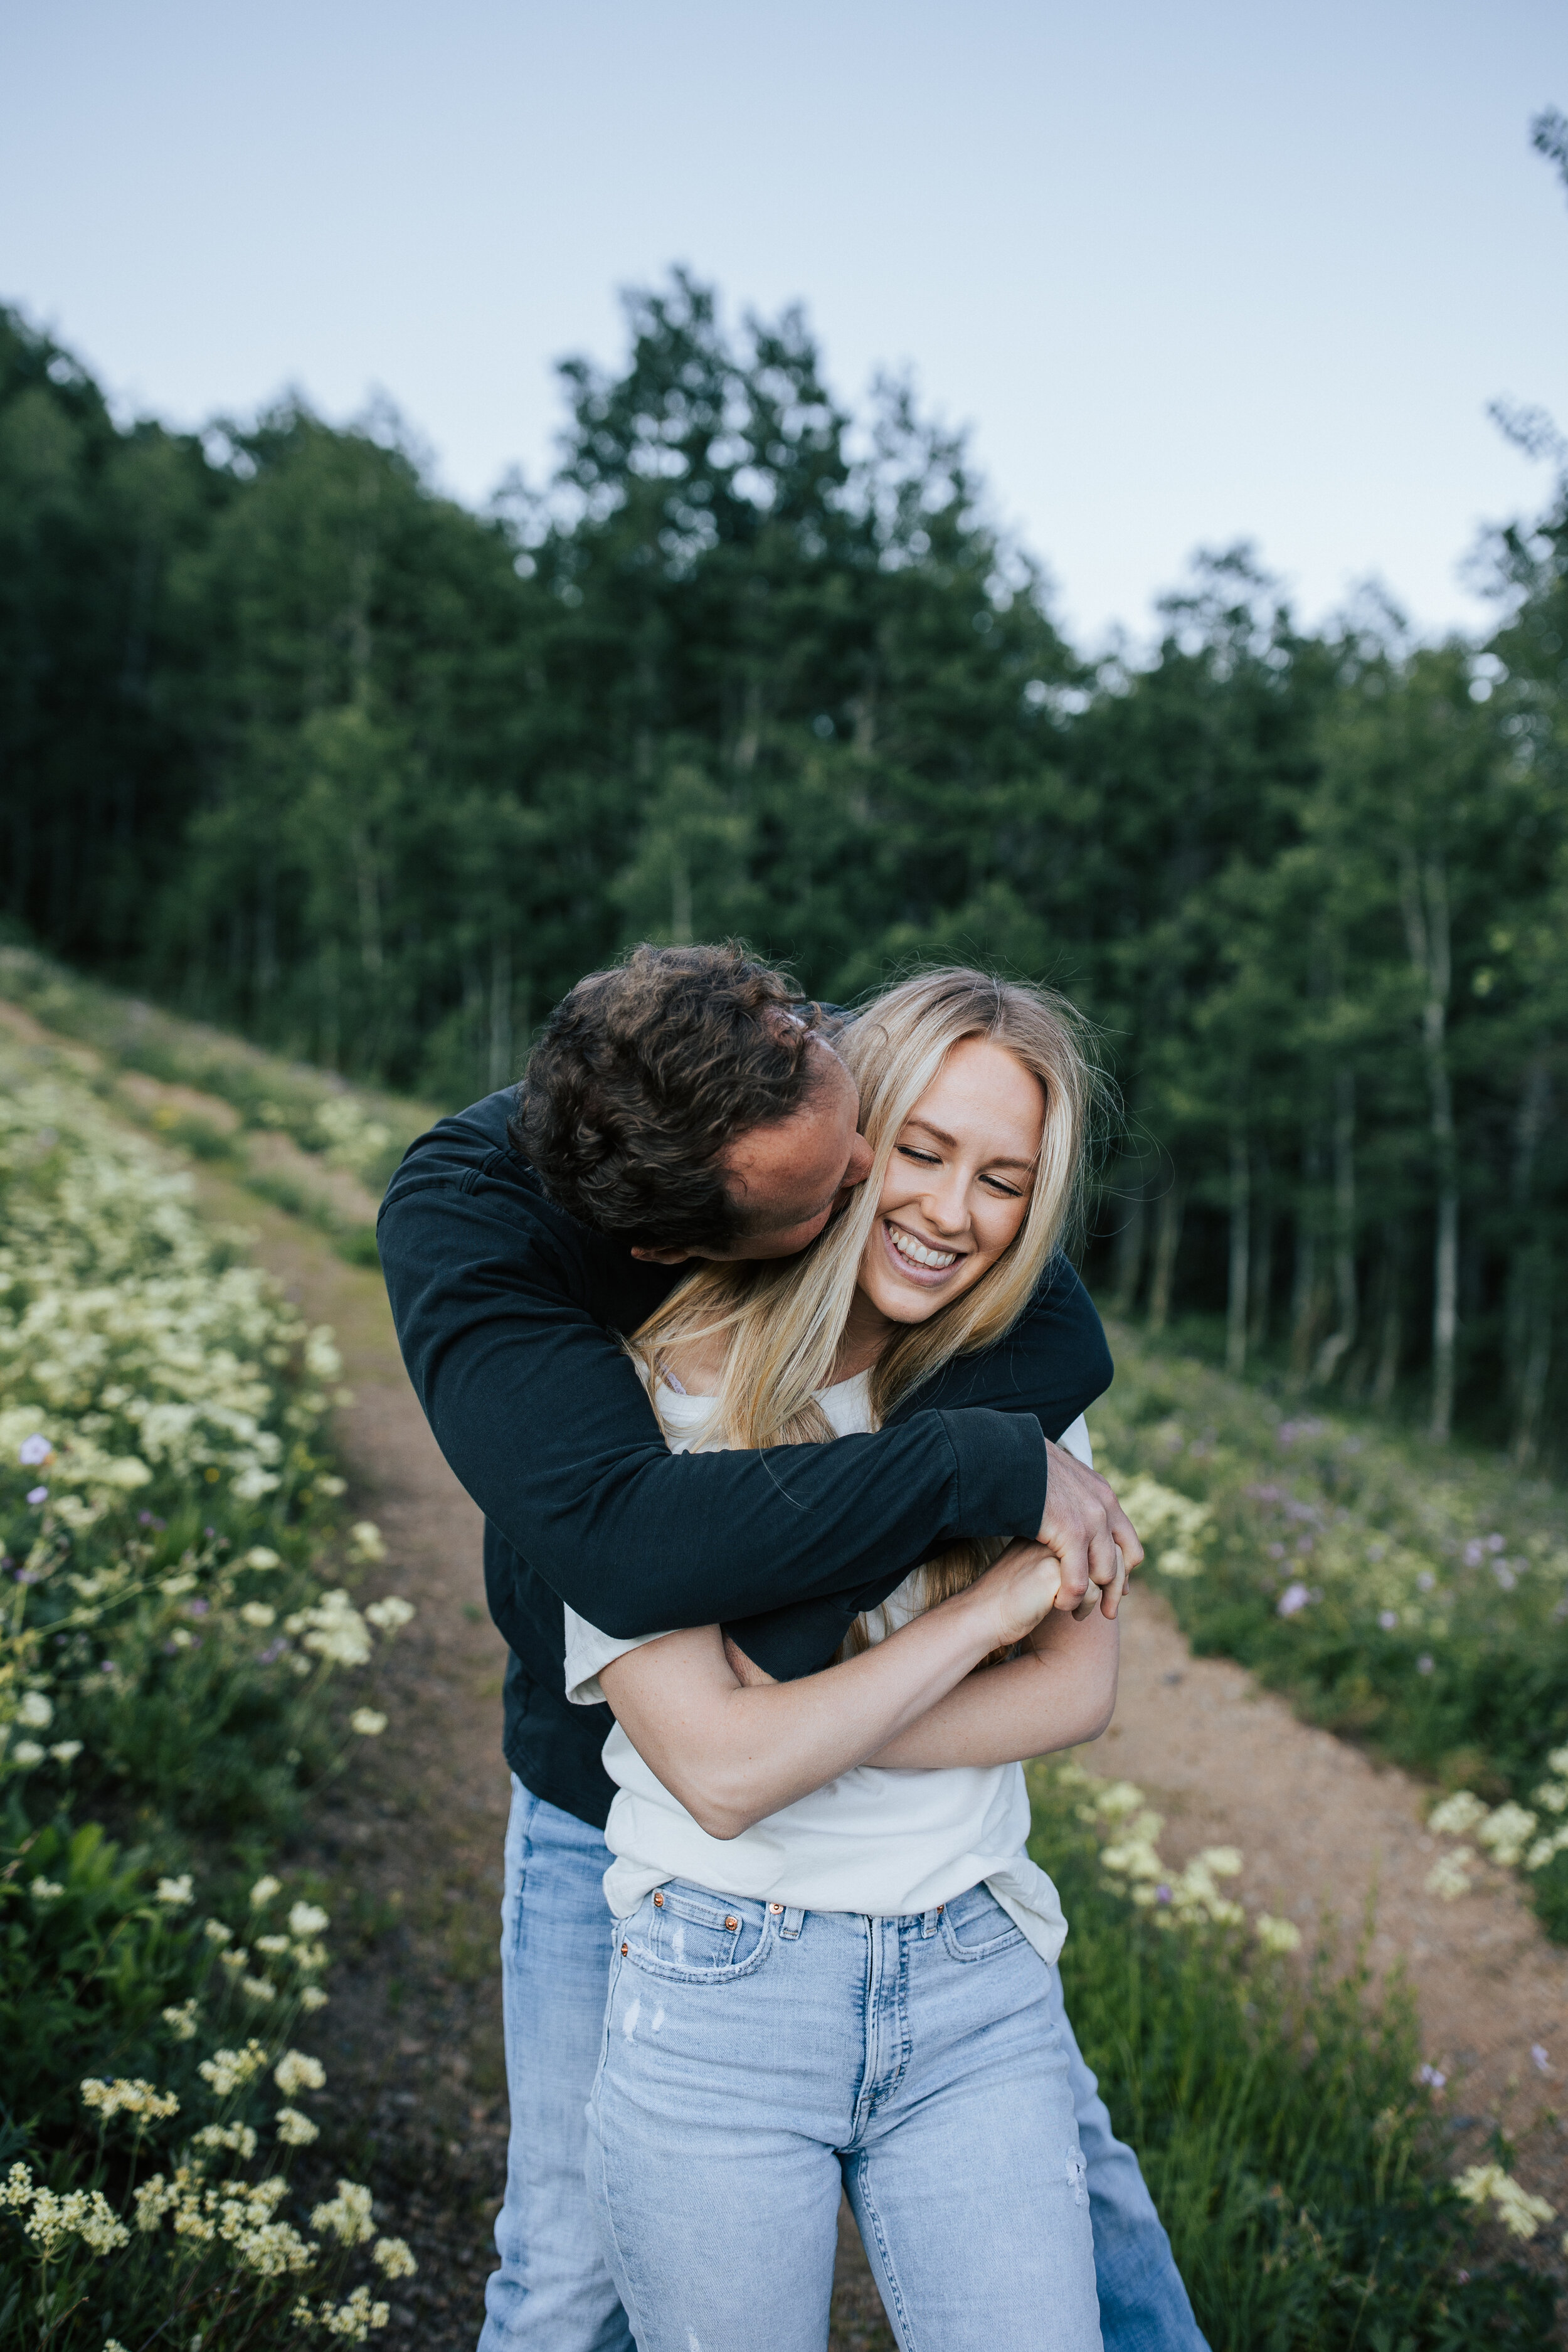  Engagement session in wildflowers in the mountains near Park City, Utah. Summertime engagement photos with mountain views. Engaged couple walk through wildflowers in the mountains. #engagementphotos #engagements #weddingphotographer #photographer #p